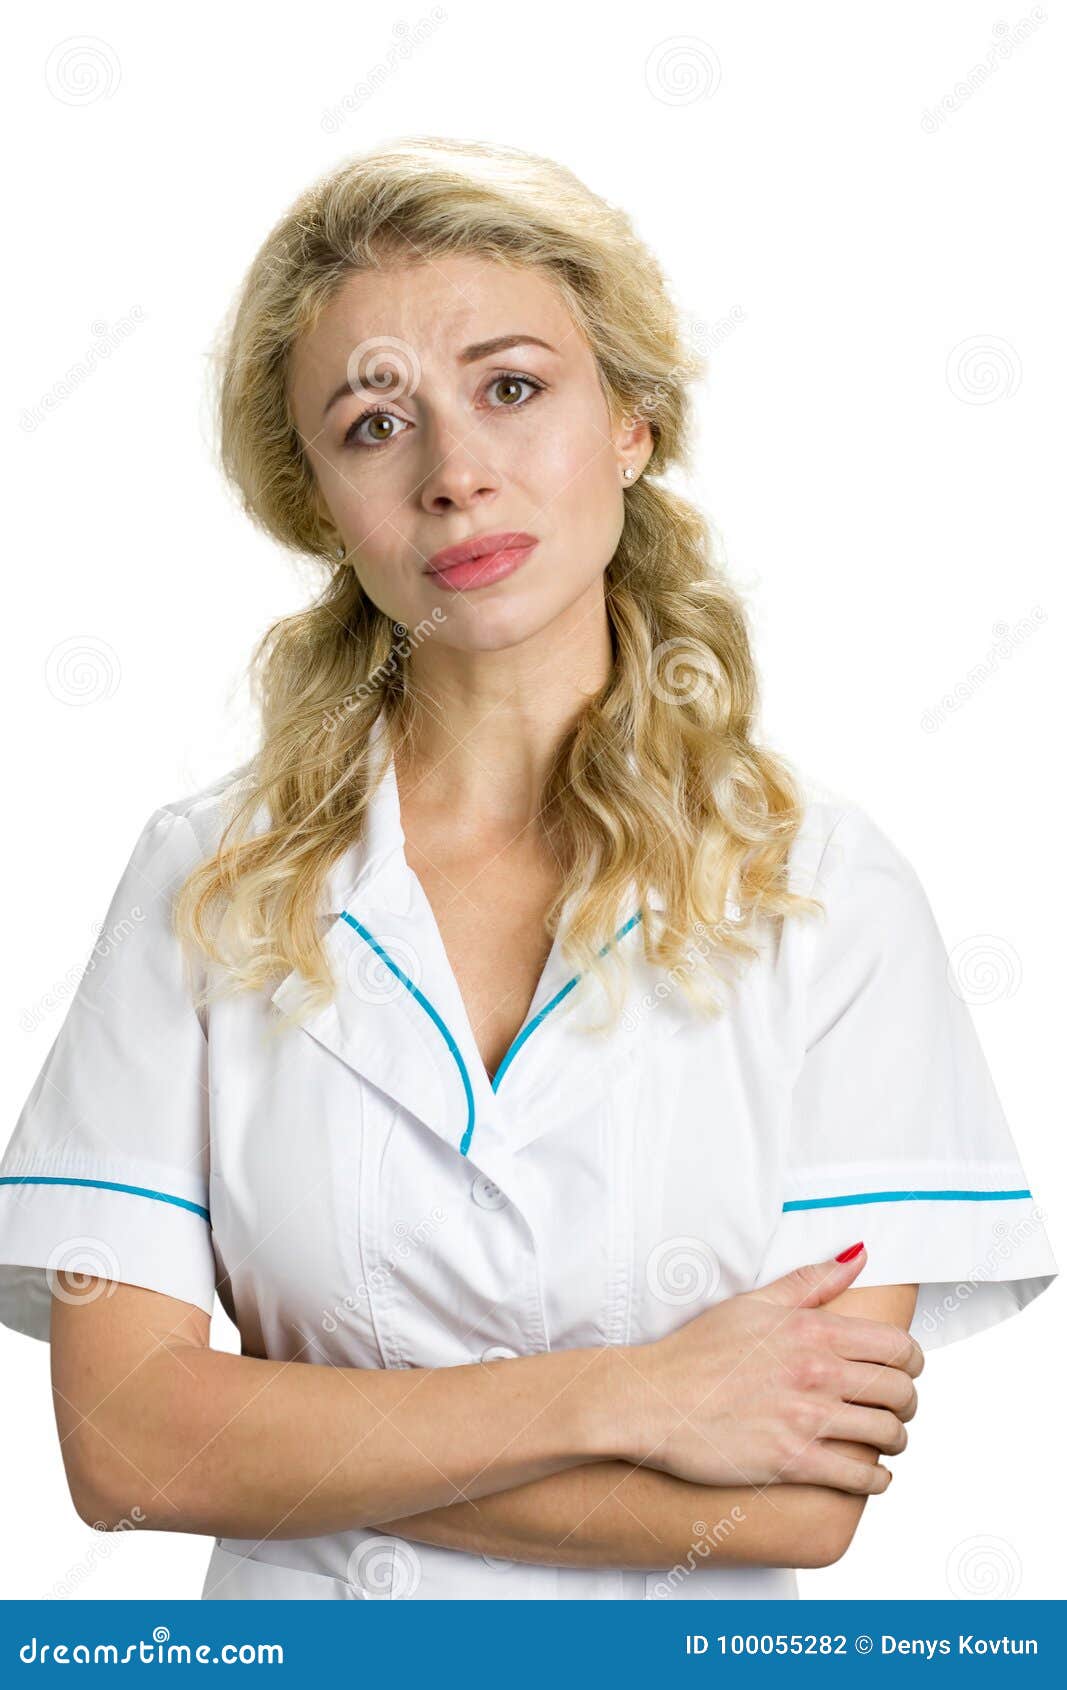 Sad Young Nurse Crossed Arms, Portrait. Stock Photo - Image of hand ...